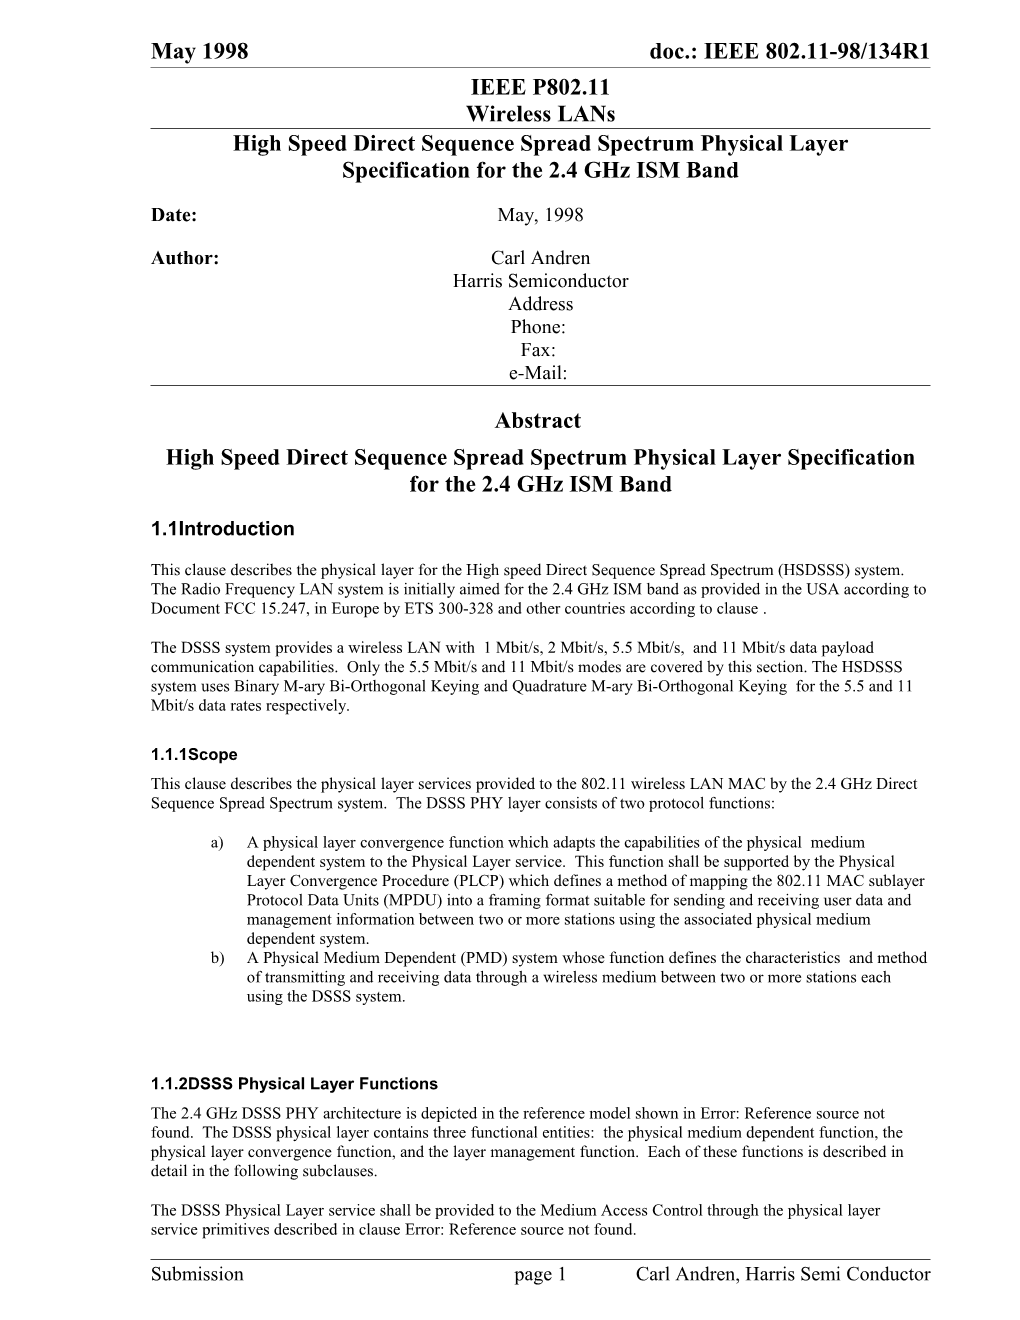 High Speed Direct Sequence Spread Spectrum Physical Layer Specification for the 2.4 Ghz